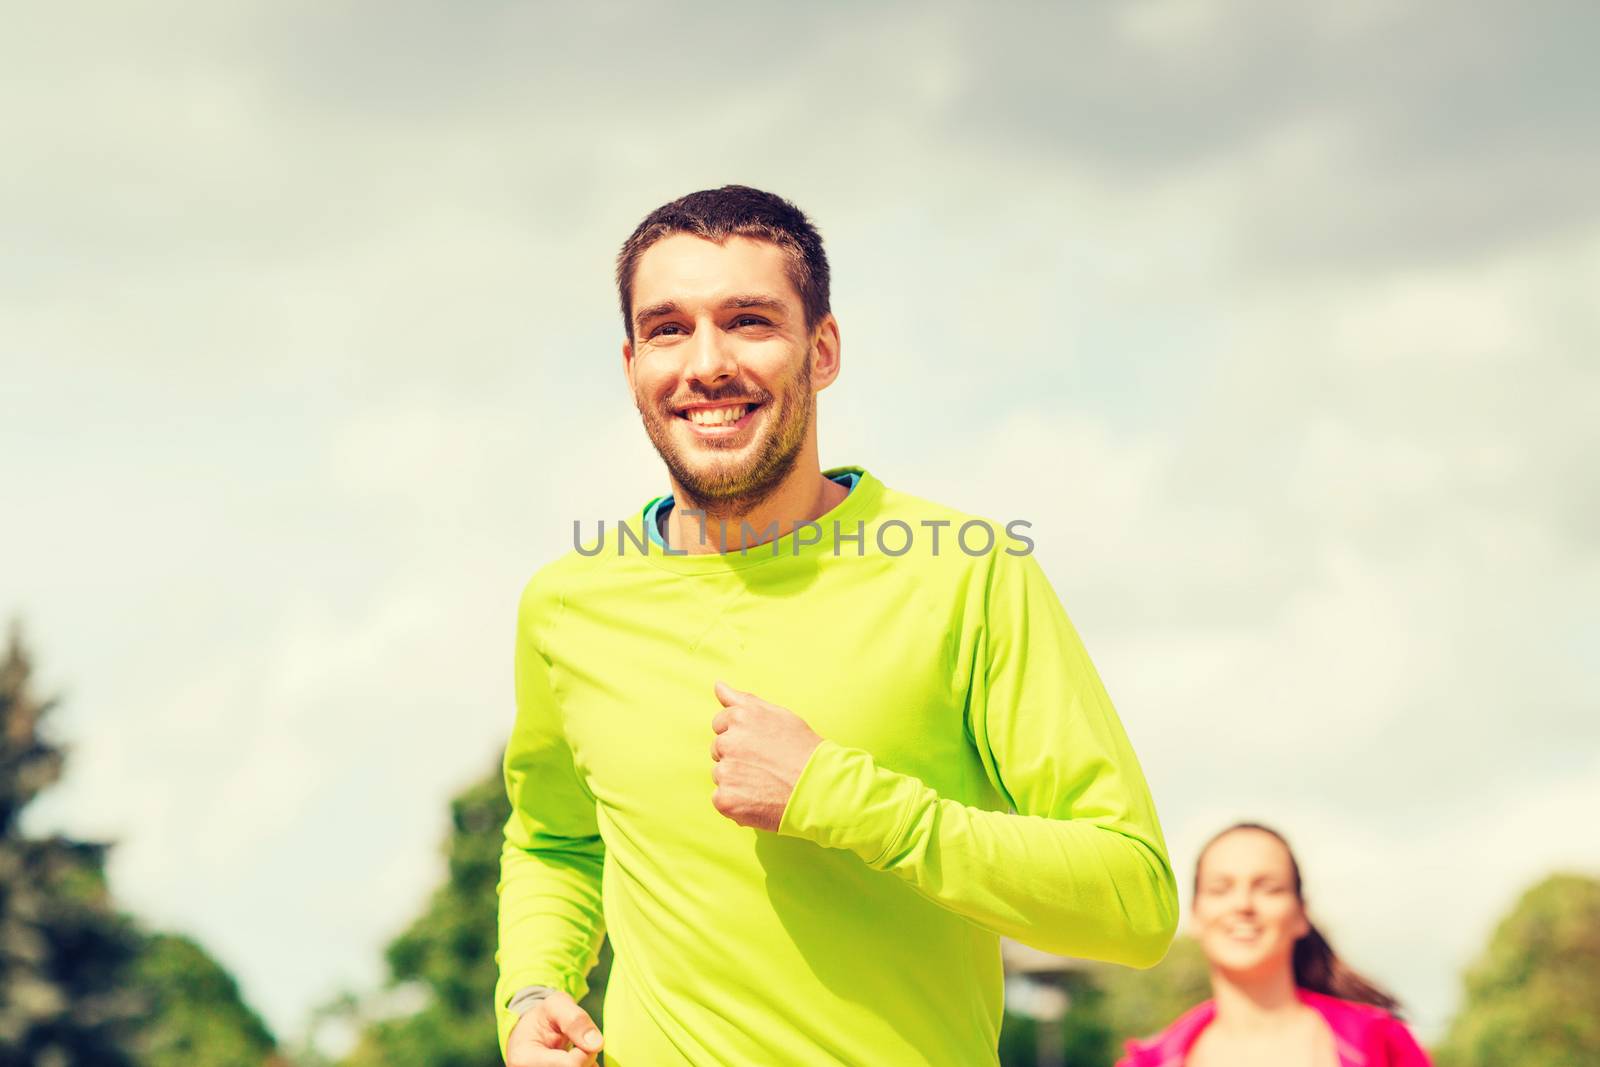 fitness, sport, friendship and lifestyle concept - smiling couple running outdoors